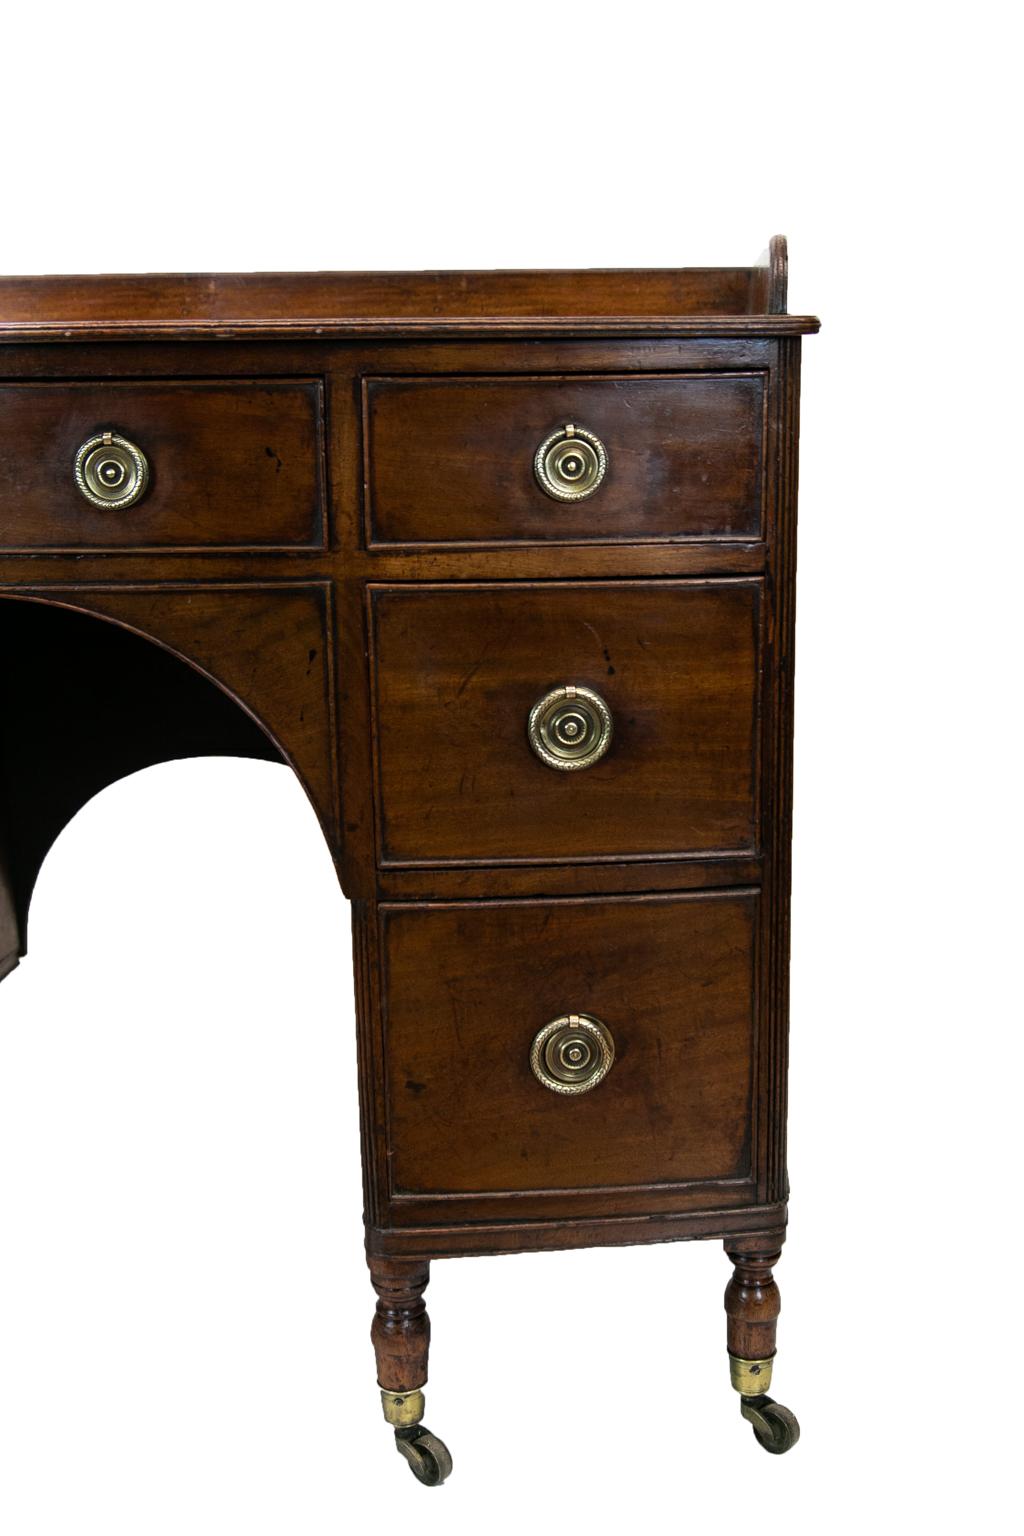 This English bow front server has a molded edge gallery on top as well as molded edges on the bow front and sides. The corners on either side of the outside banks of drawers are flanked by reeded quarter columns. Below the center drawer is a